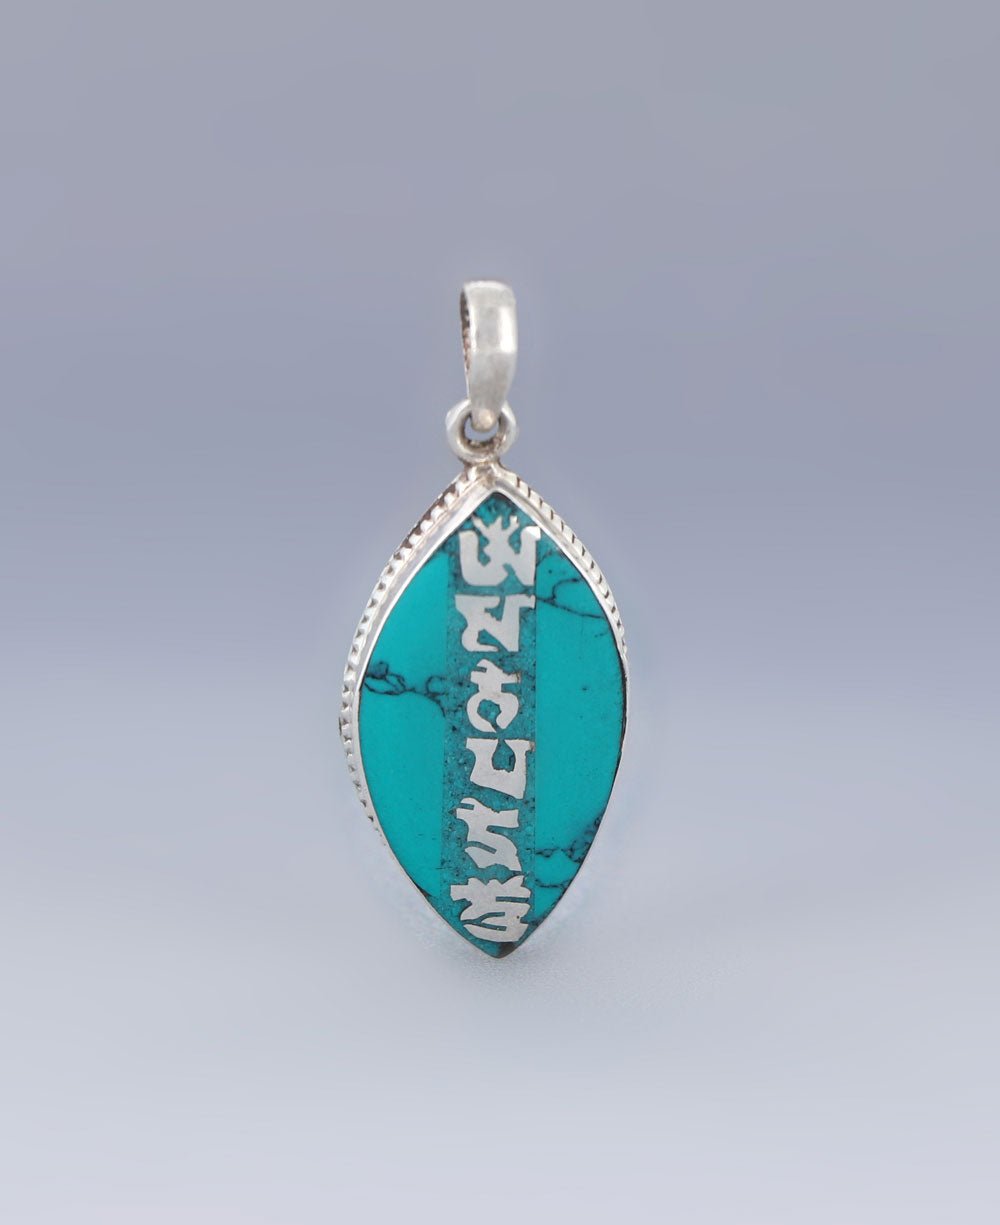 Turquoise Inlay Om Mani Padme Hum Sterling Silver Pendant - Charms & Pendants